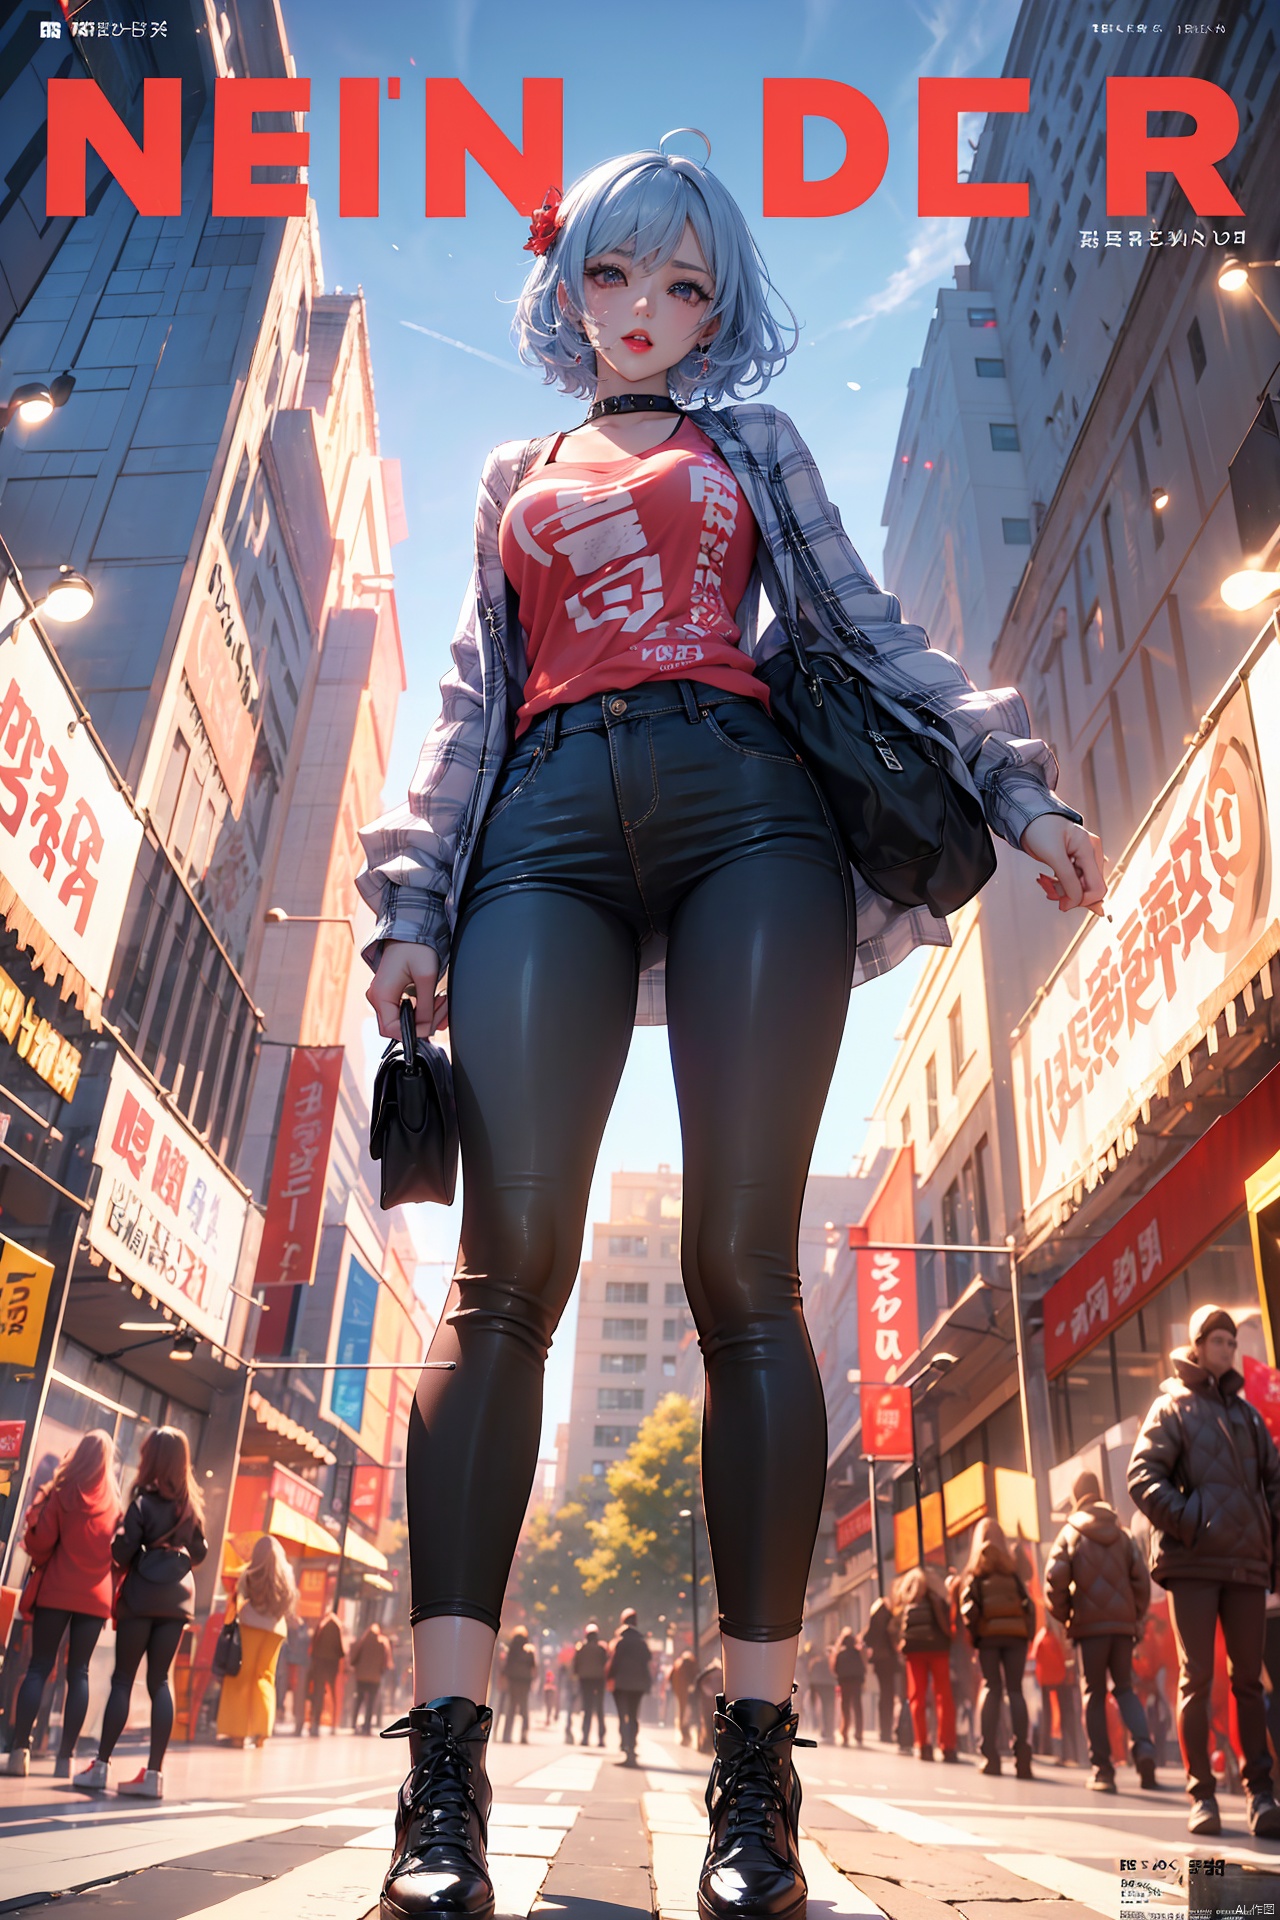  (best quality), (ultra detailed), ((masterpiece)), sfw,consored,illustration, ray tracing,contrapposto, female focus,model,NSFW
//////////////////////////
sexy, fine fabric emphasis,wall paper, crowds, fashion, Lipstick, depth of field, street, in public,(Magazine cover:1.2),(title),(Magazine cover-style illustration of a fashionable woman), posing in front of a colorful and dynamic background. (The text on the cover should be bold and attention-grabbing, with the title of the magazine and a catchy headline)., yutu honkai3rd